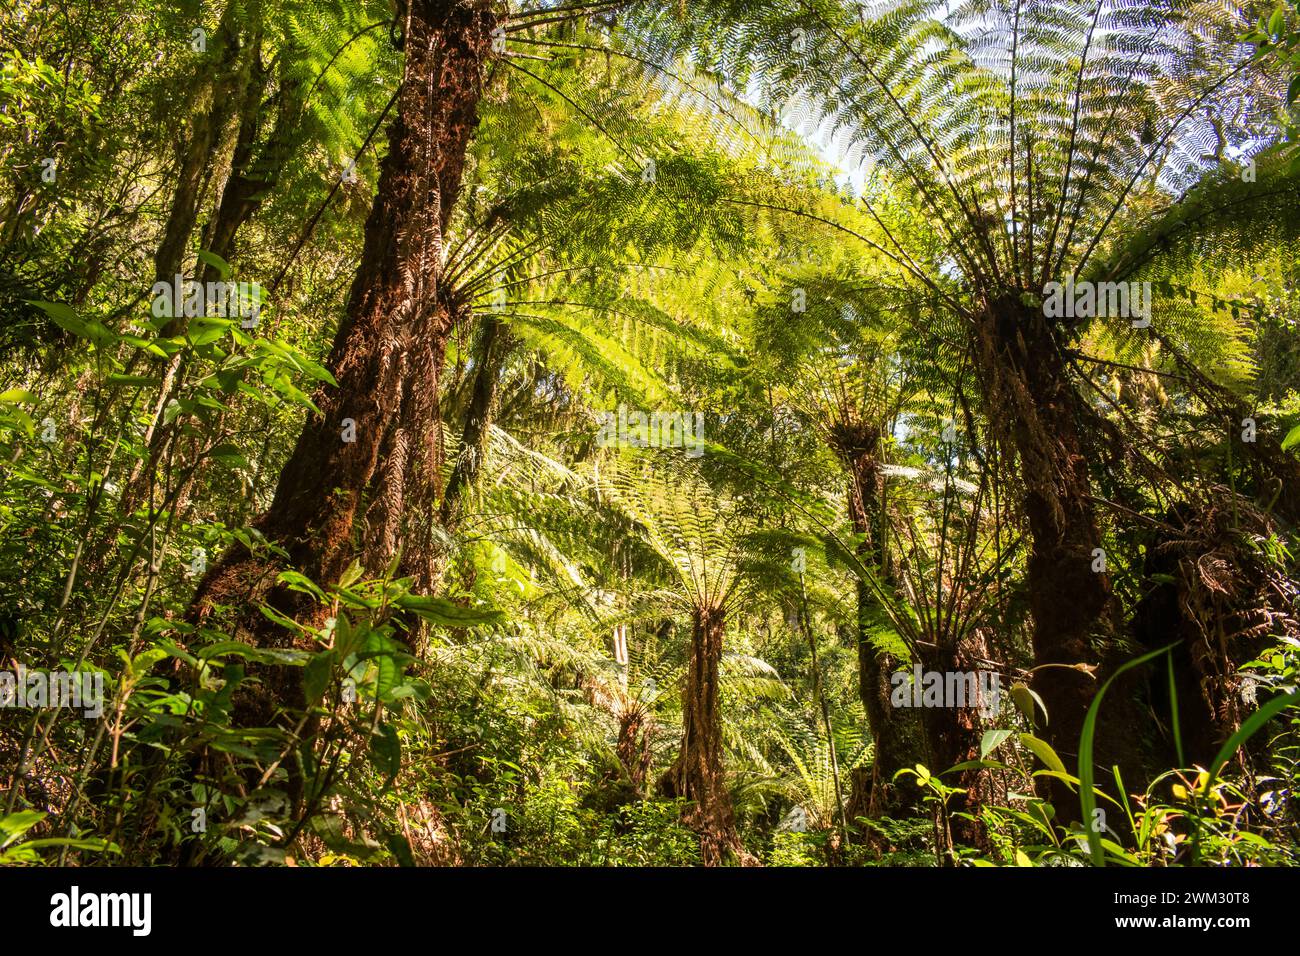 Native forest with many Dicksonia sellowiana (Xaxim), an endangered arborescent fern at the Ronda Natural Park in Sao Francisco de Paula (Brazil) Stock Photo